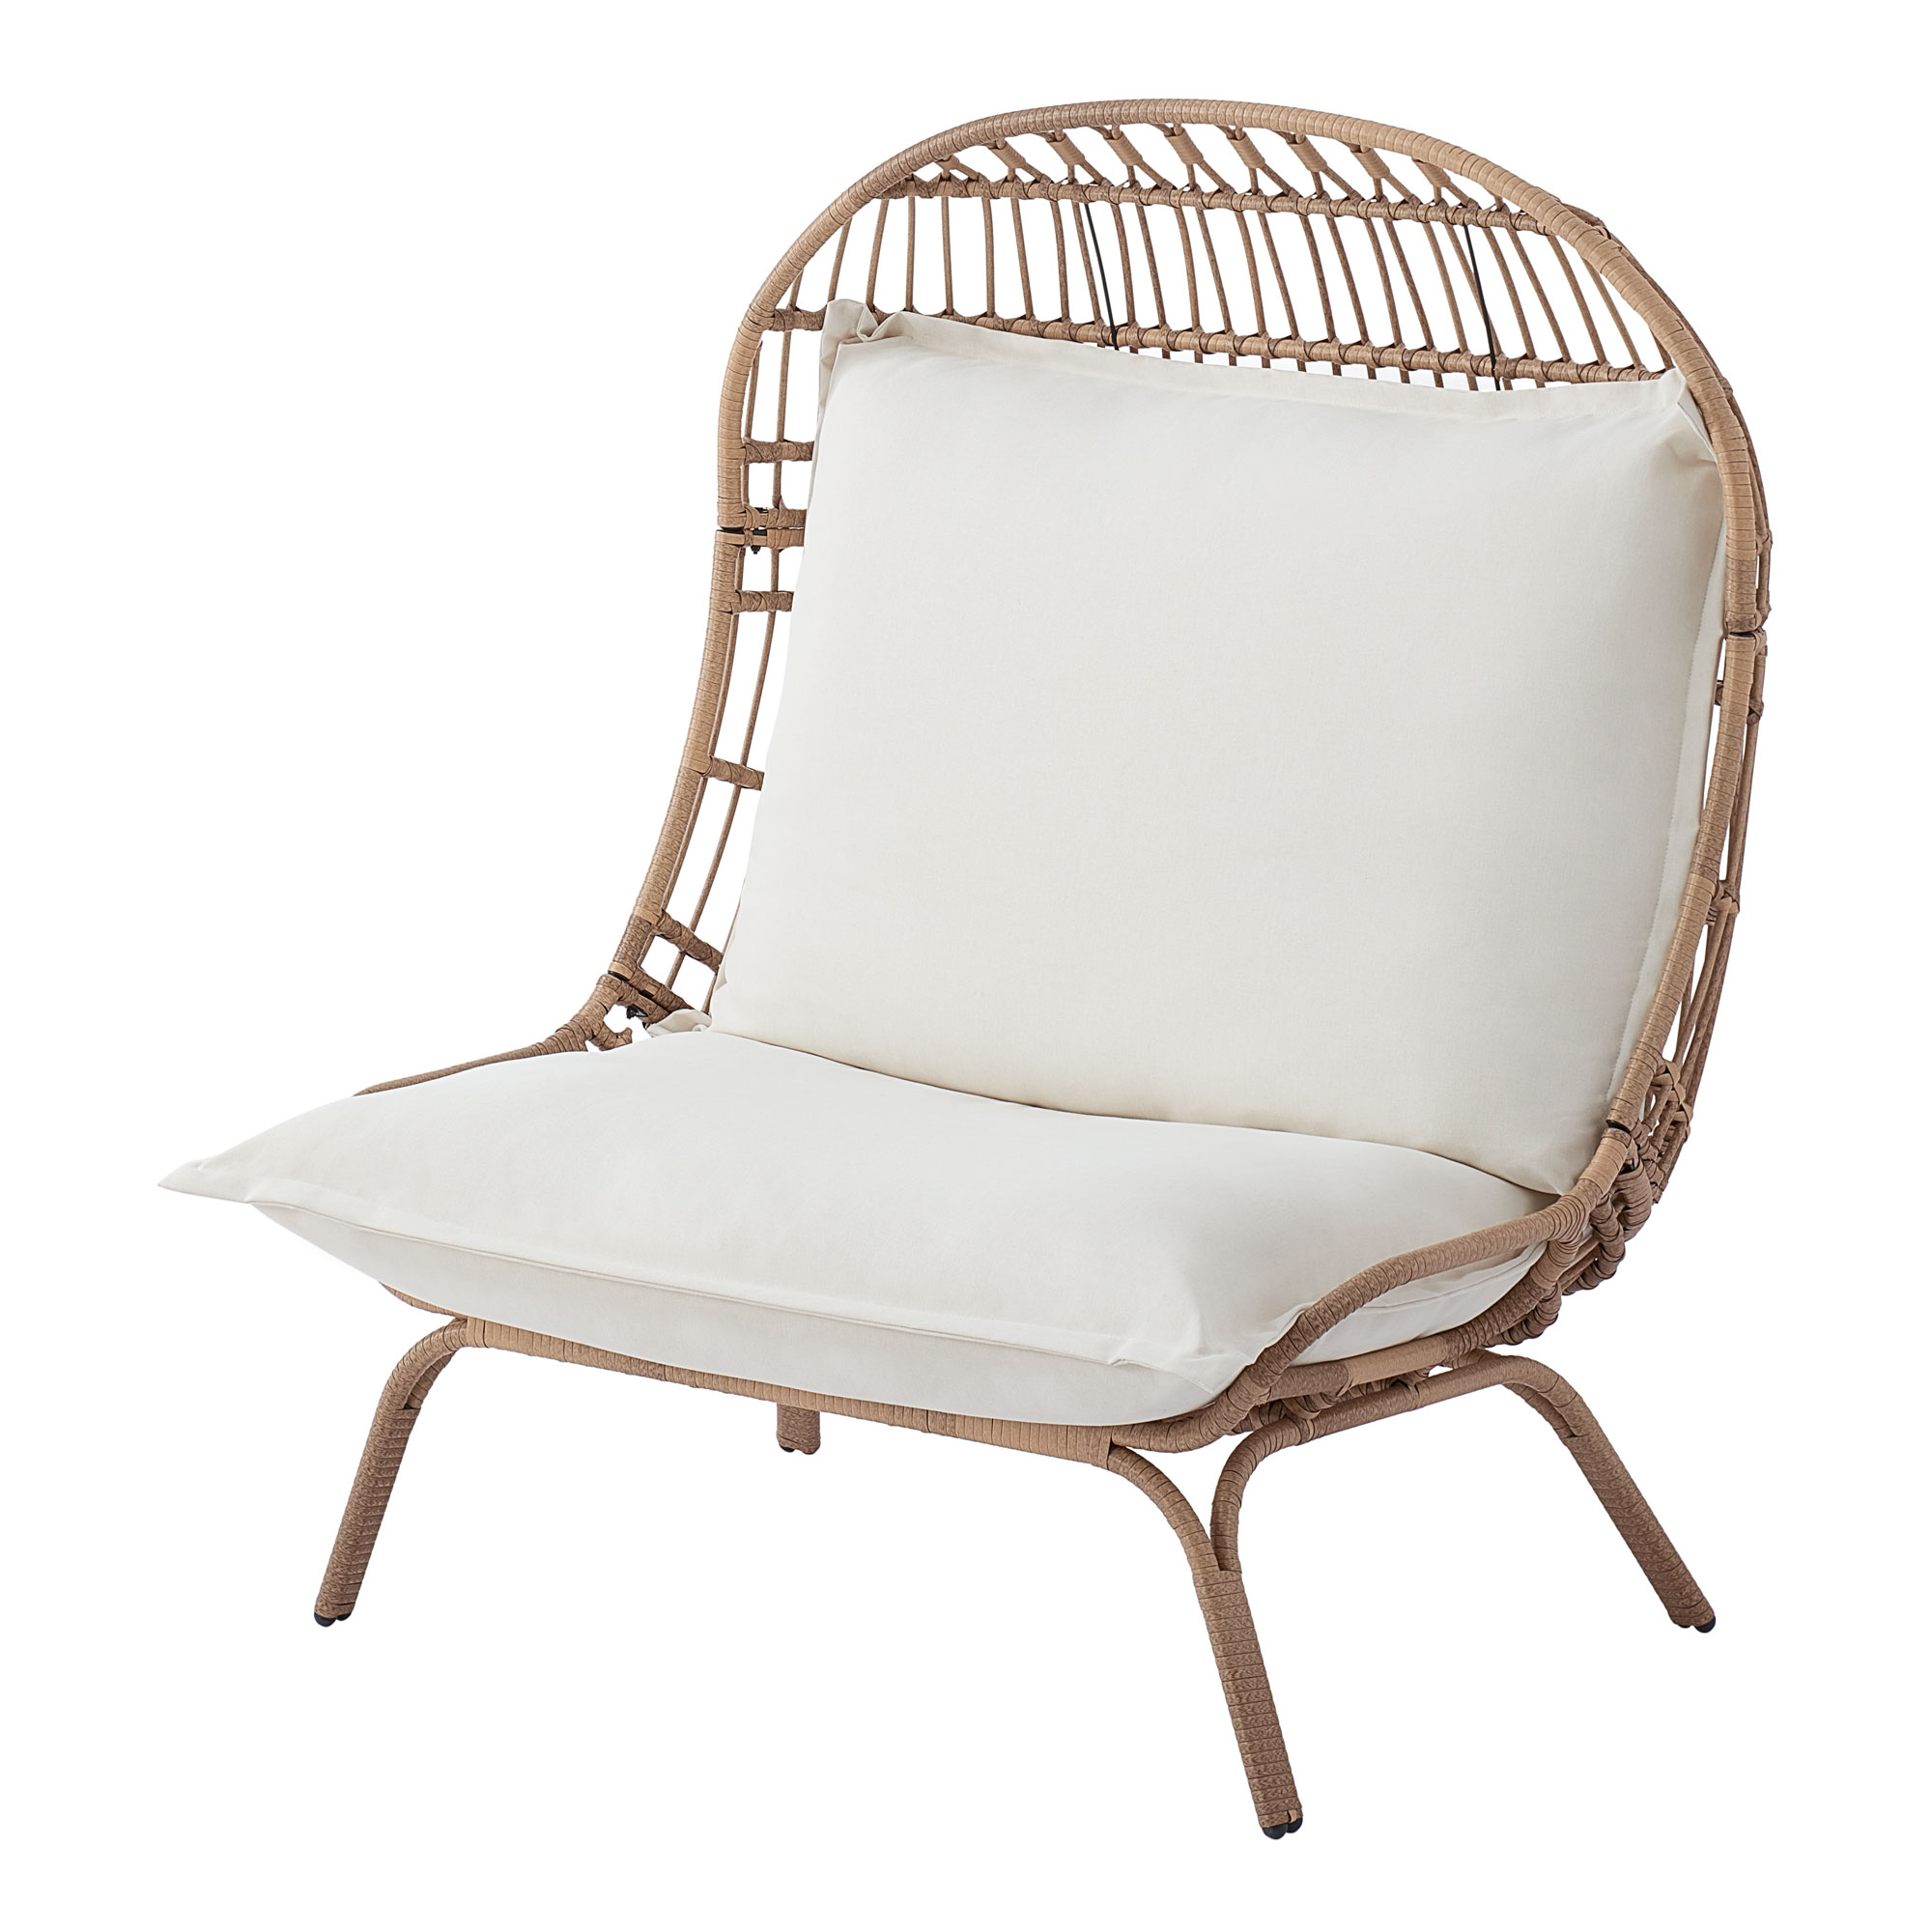 Better Homes & Gardens Willow Sage Steel Wicker Patio Cuddle Chair, Brown - image 2 of 8